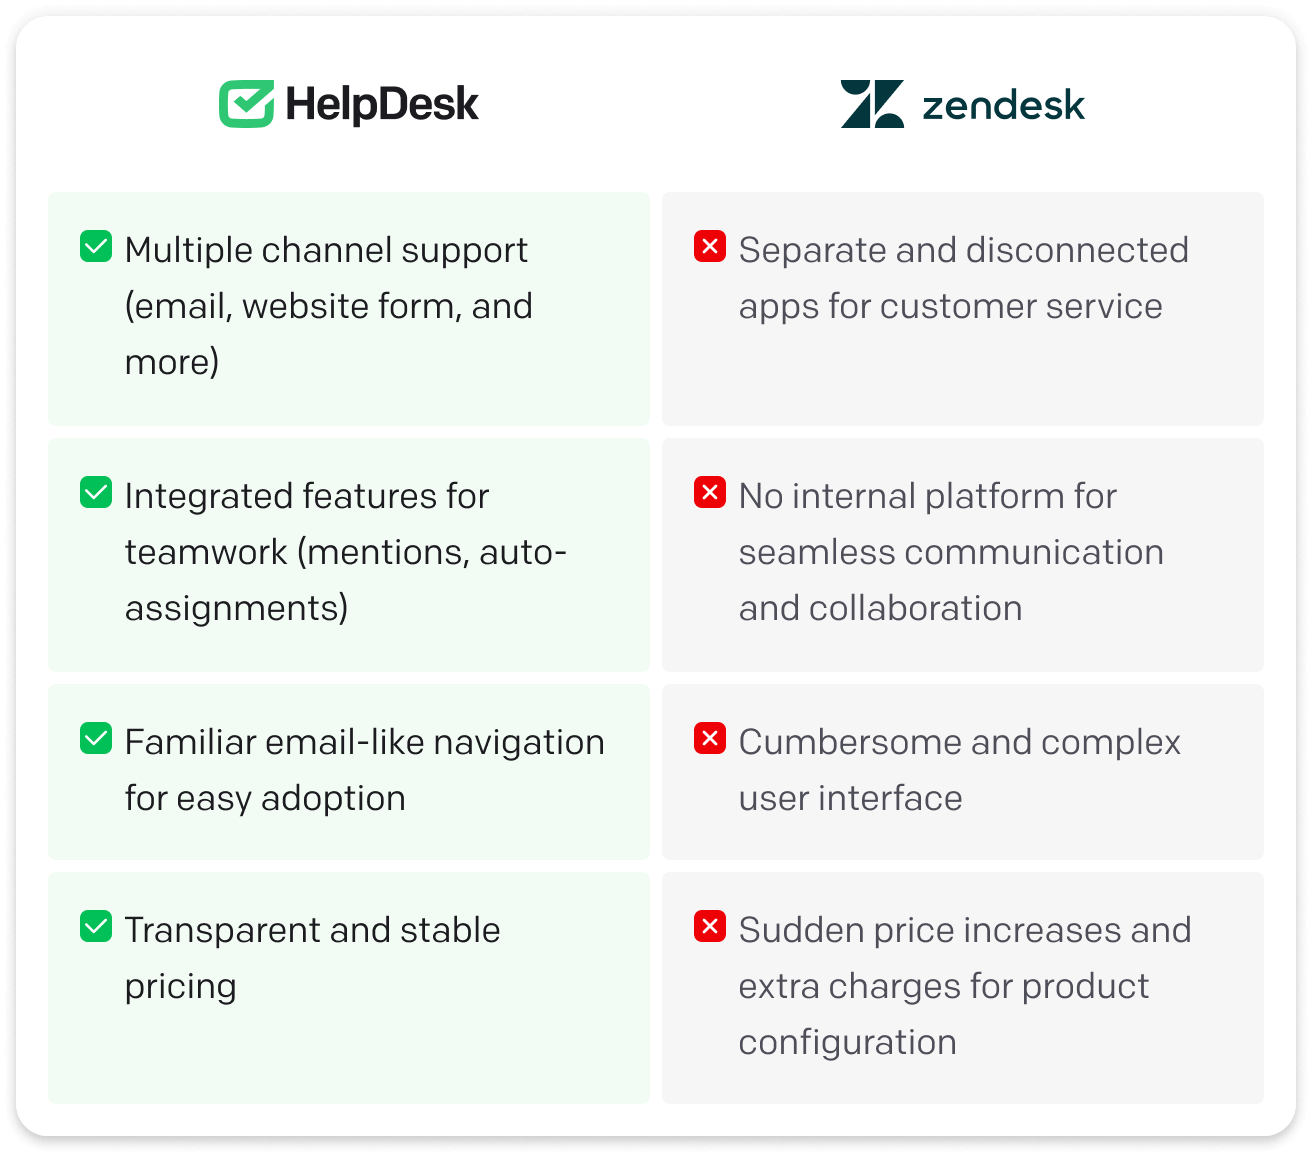 HelpDesk and Zendesk - comparison showing Multiple channel support (email, website form, and more), Integrated features for cross-team activities (mentions, auto-assignments), Familiar email-like navigation for easy adoption, and Transparent and stable pricing in HelpDesk